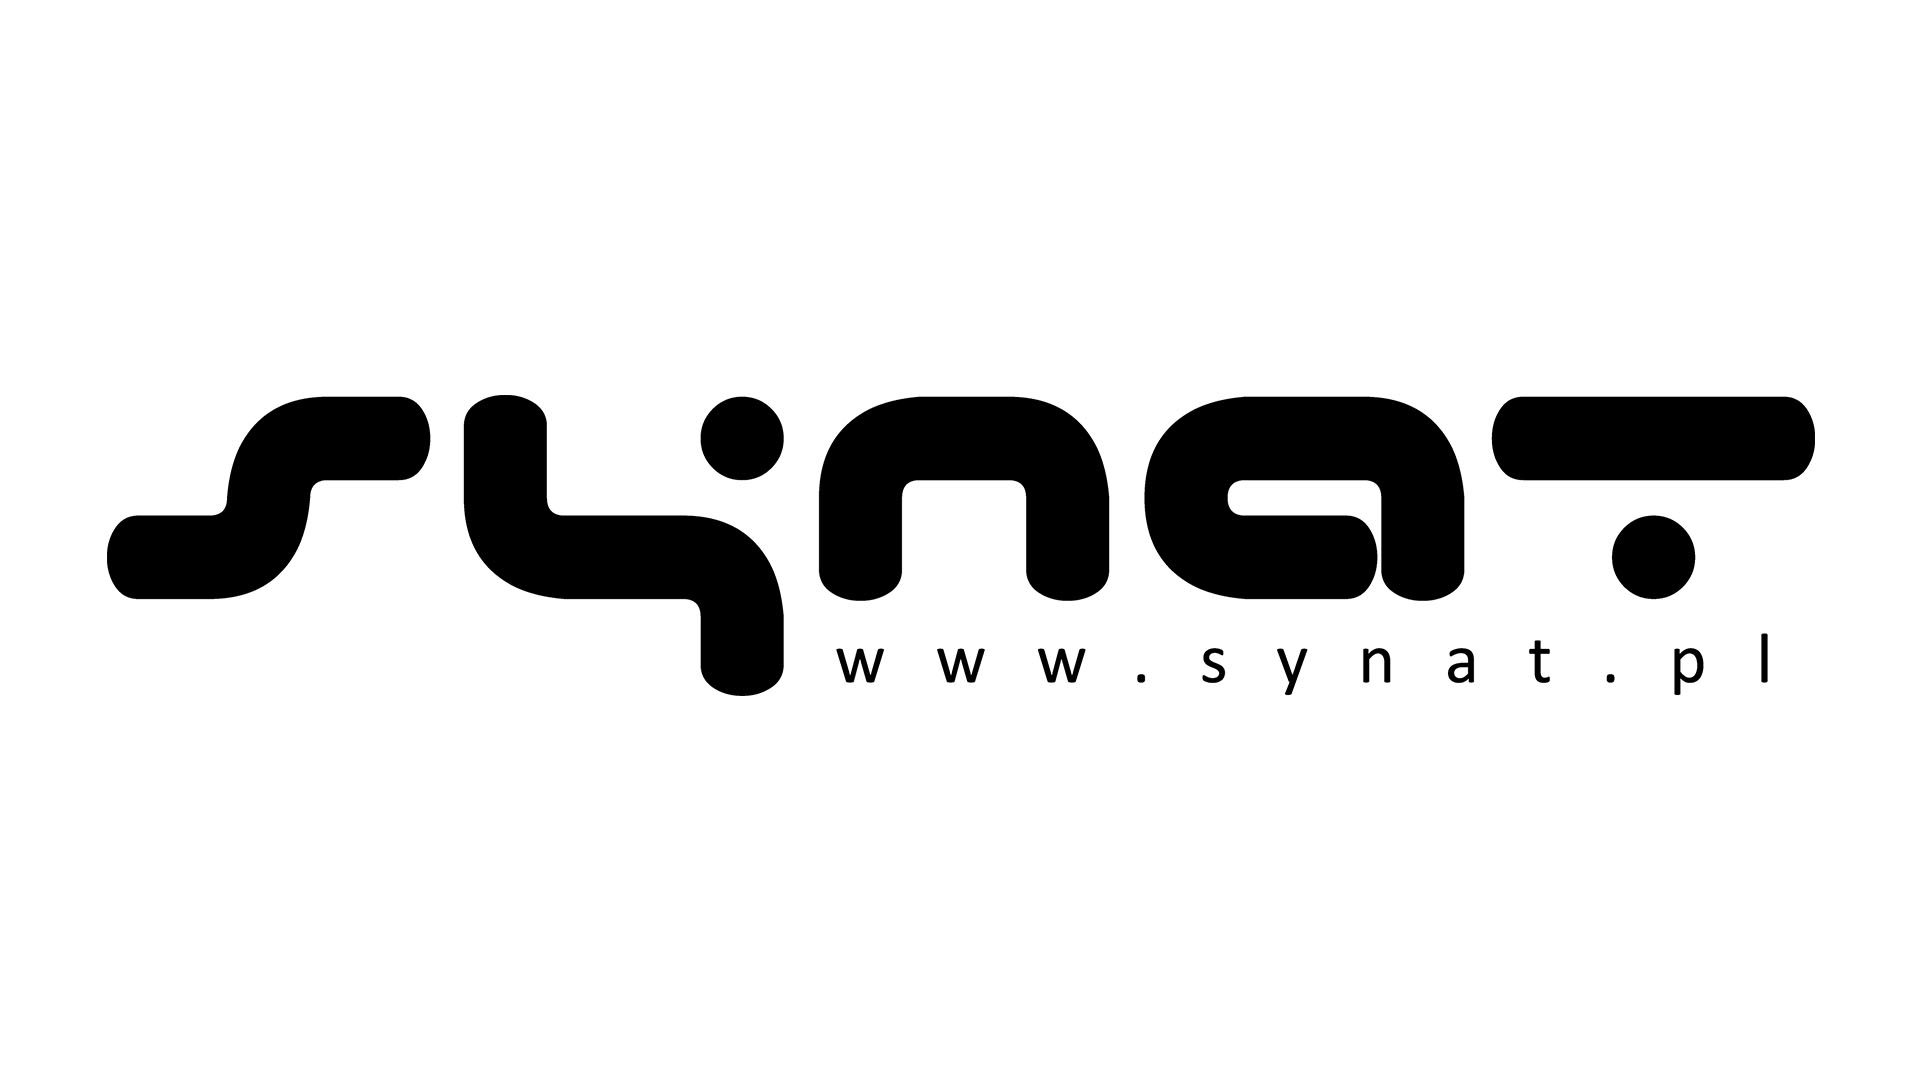 Initiation of the SYNAT project